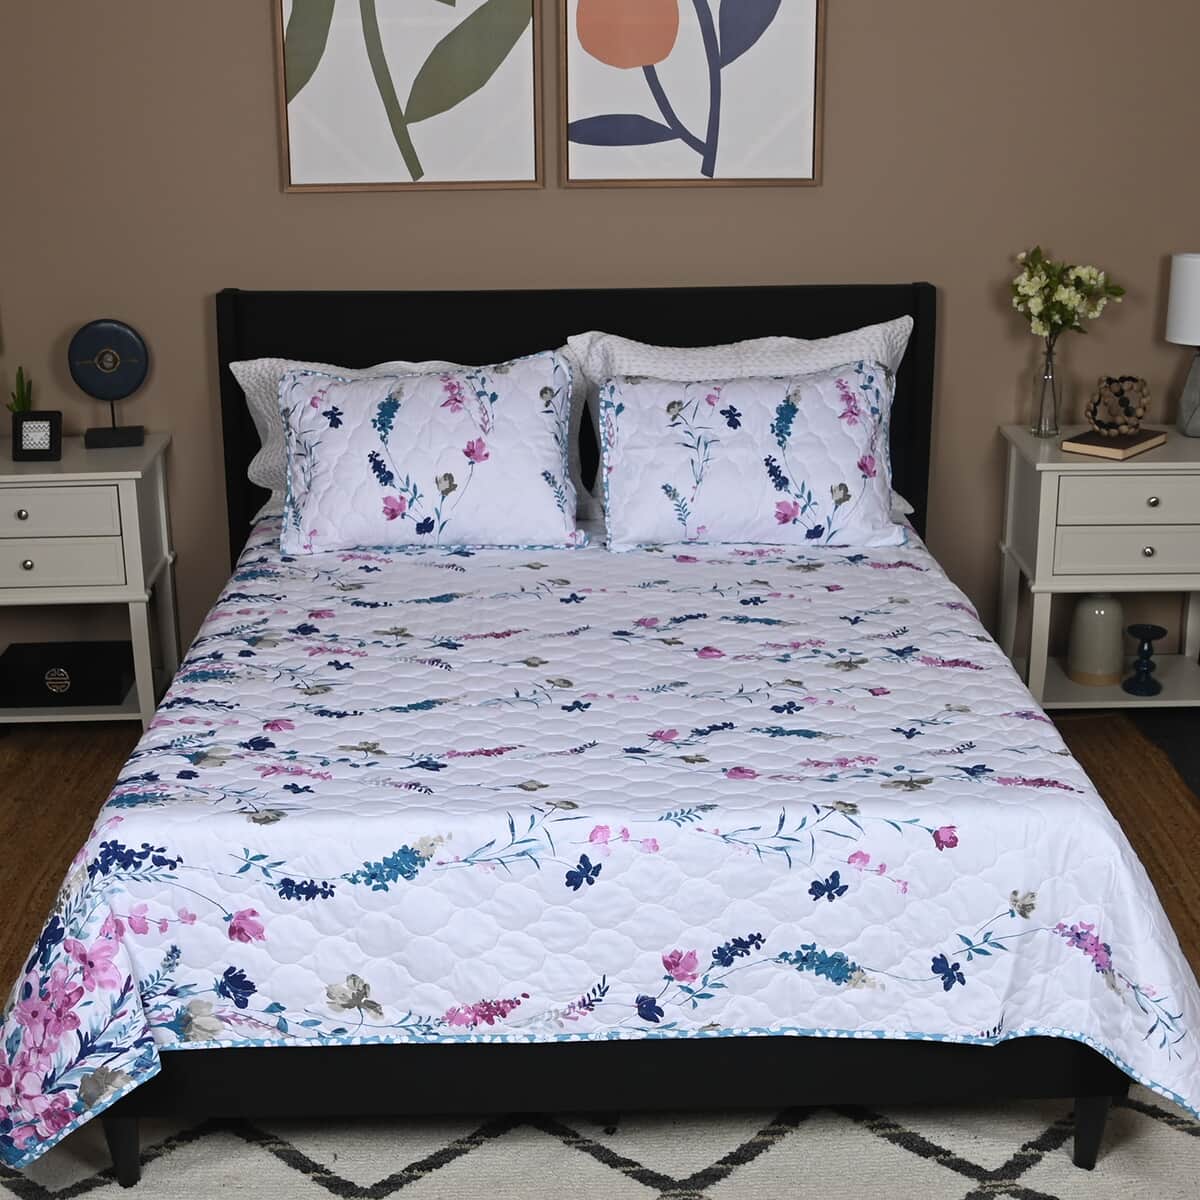 SEASIDE VILLA 3pc White and Purple Floral Disperse Print Quilt Set - (Queen) image number 0